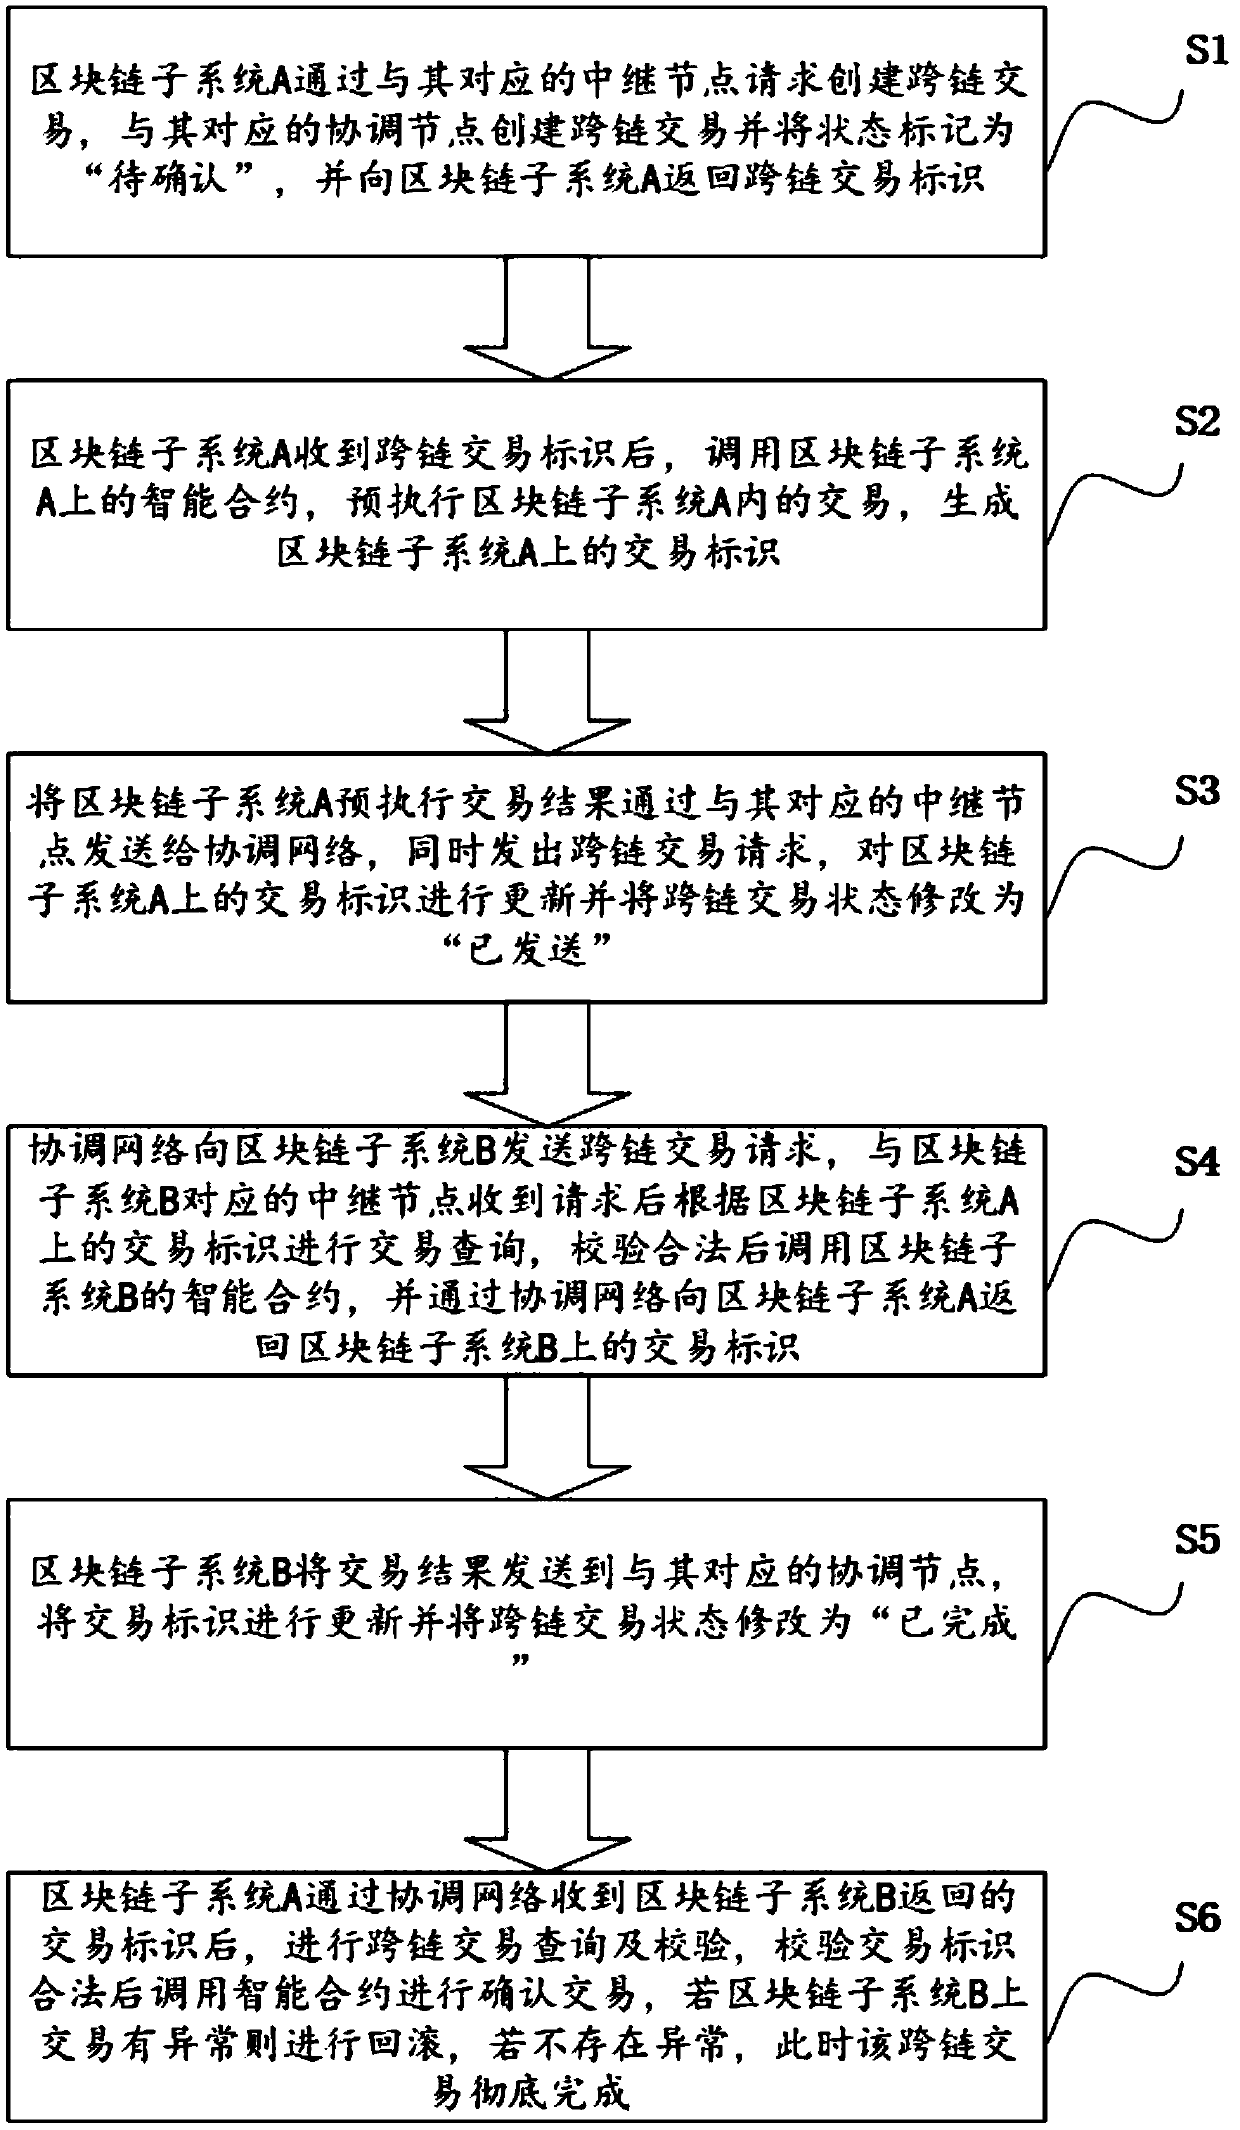 Relay-based block chain interaction system and method